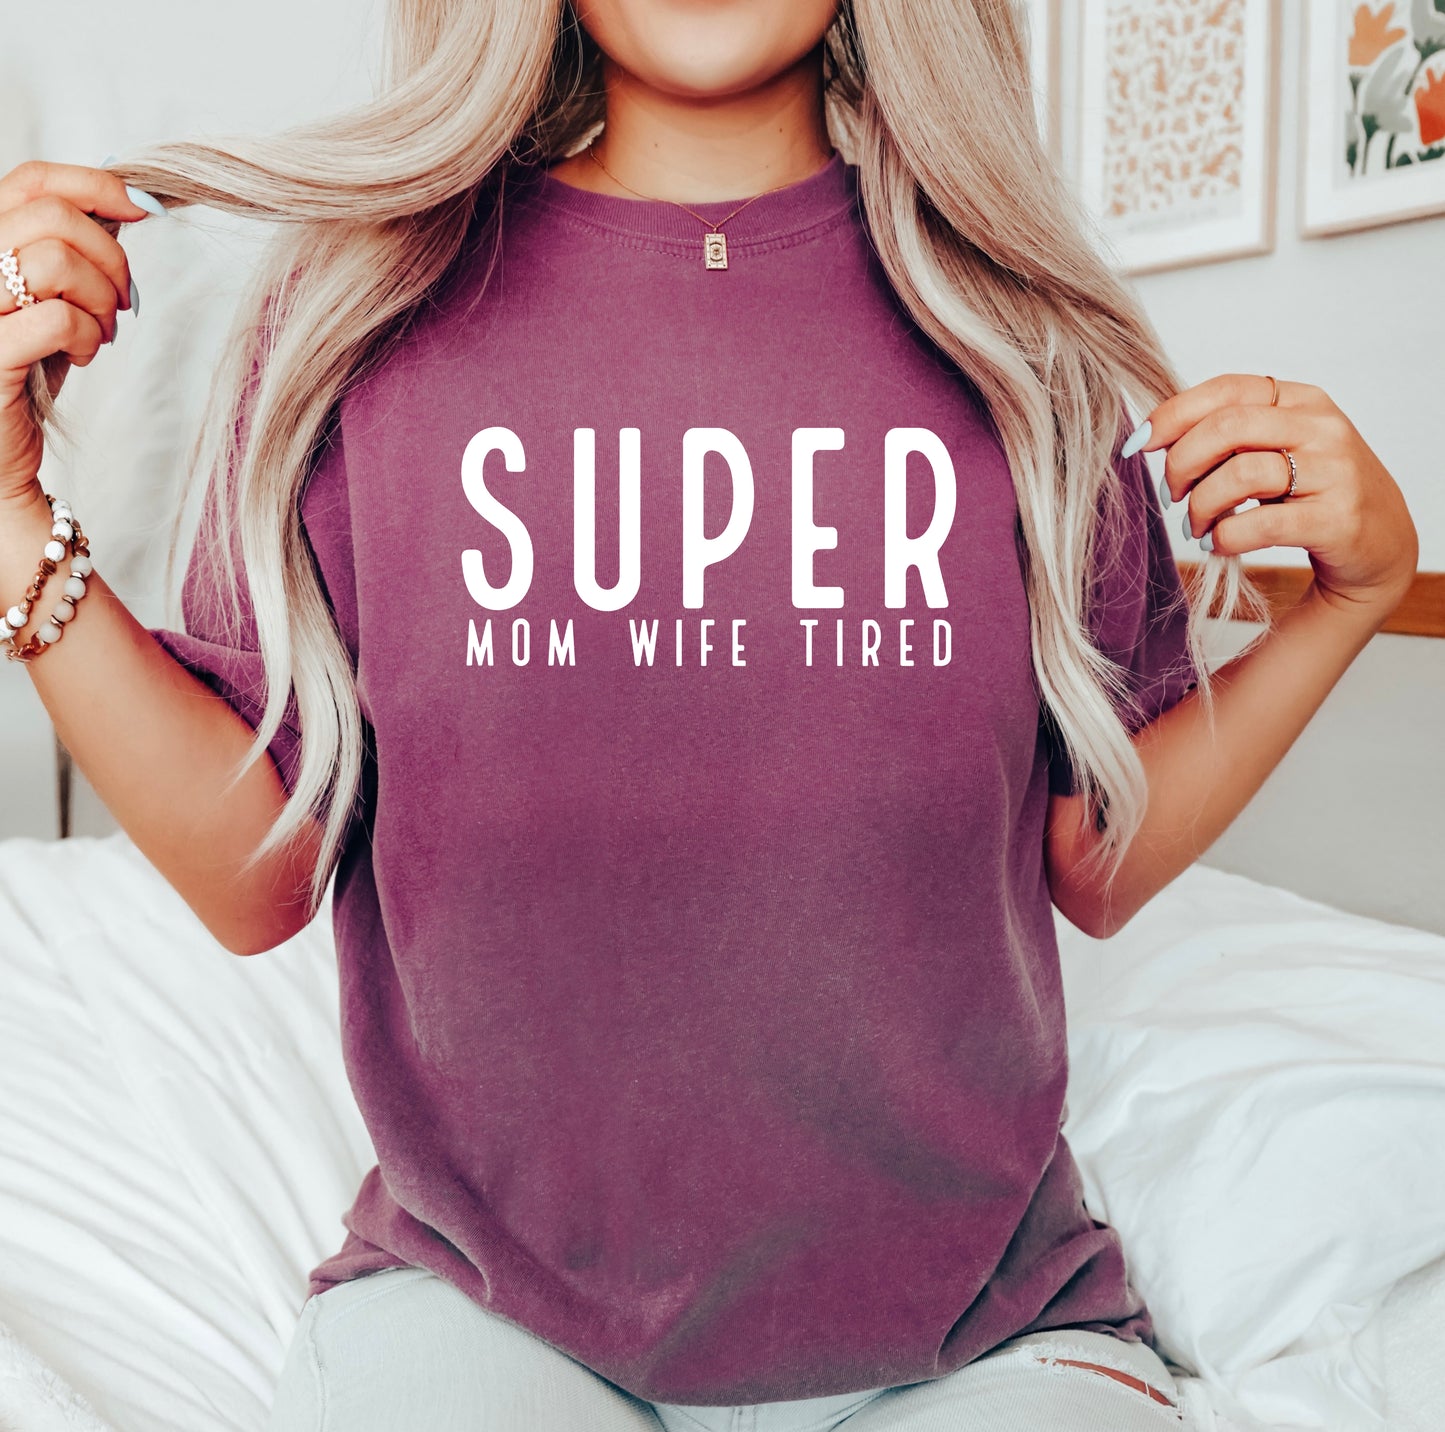 Super Mom Wife Tired | Garment Dyed Short Sleeve Tee